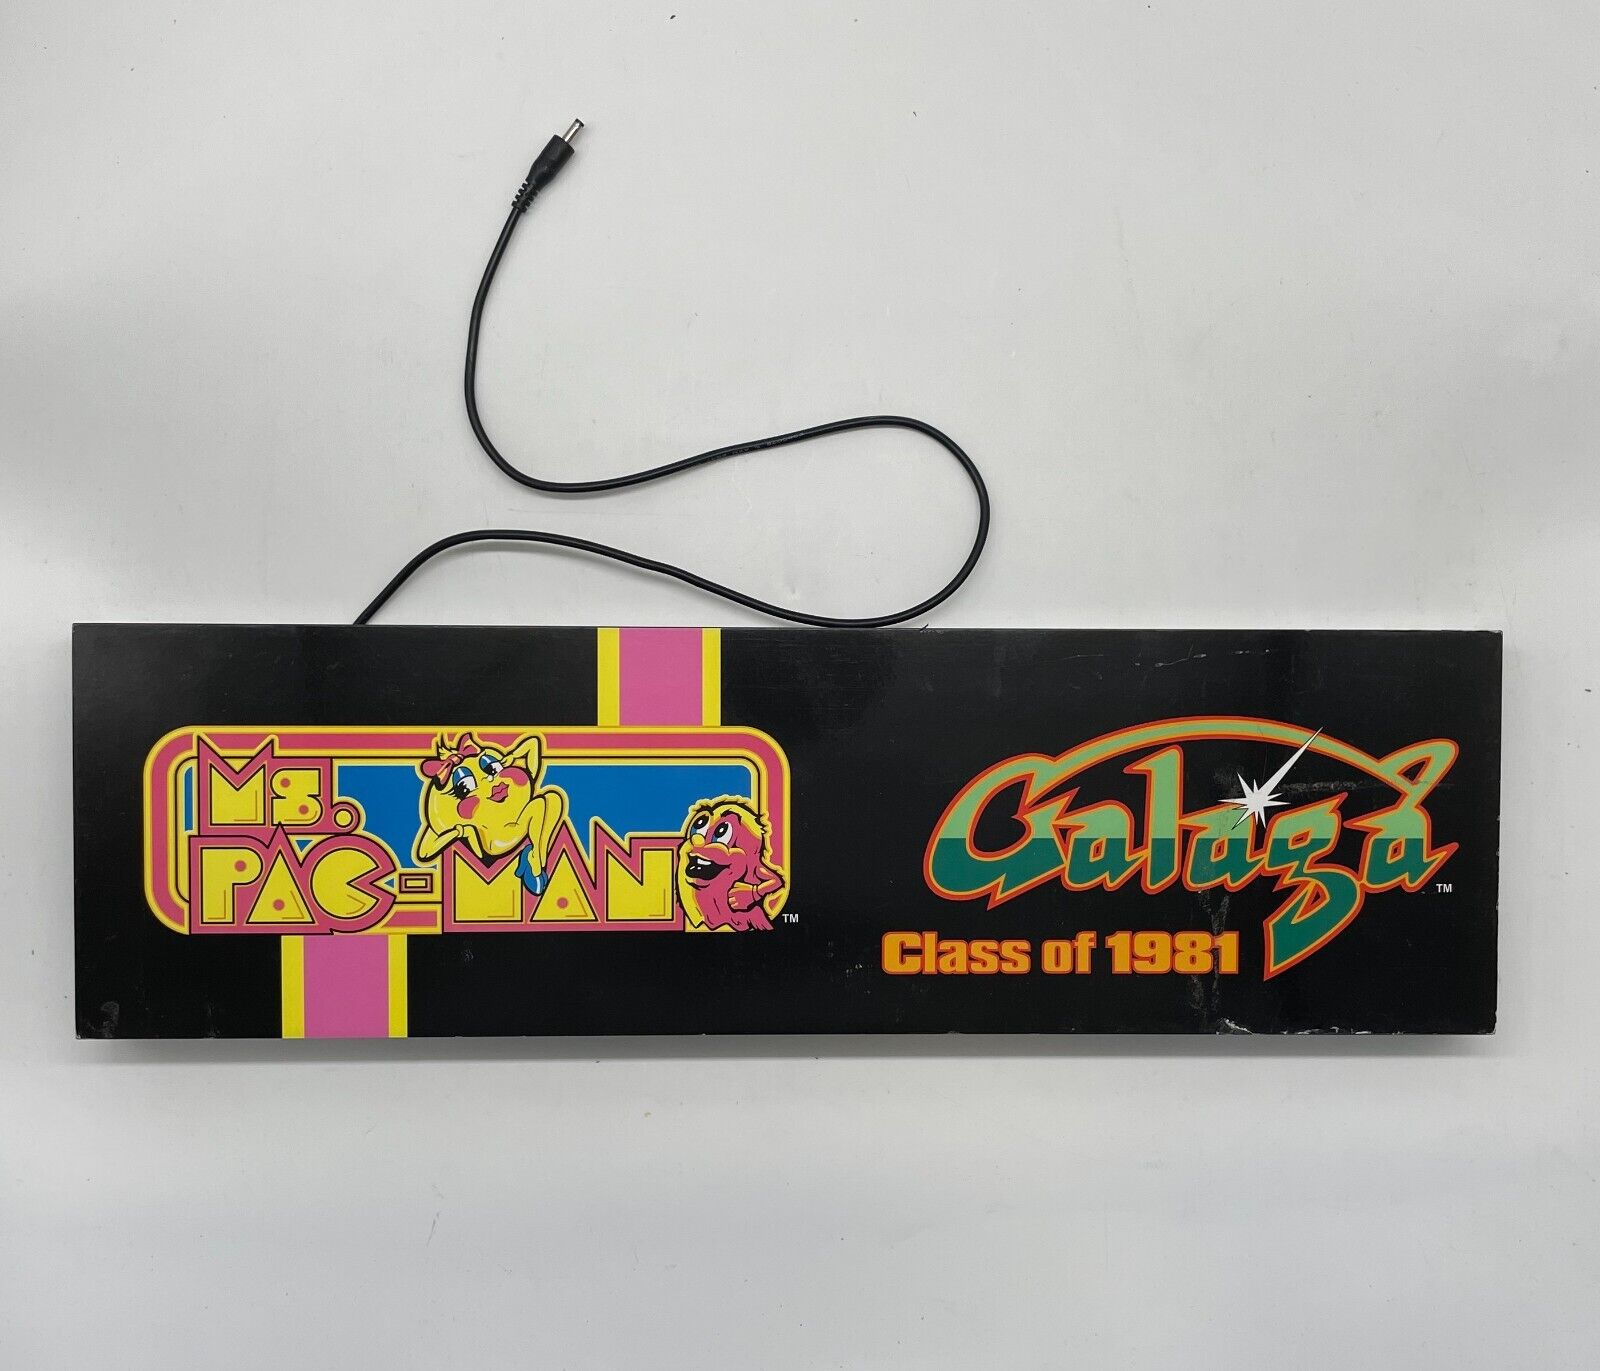 Ms. Pac-Man Galaga Class of 81 Arcade Game Light Up Marquee - Arcade1Up  Panel B | eBay